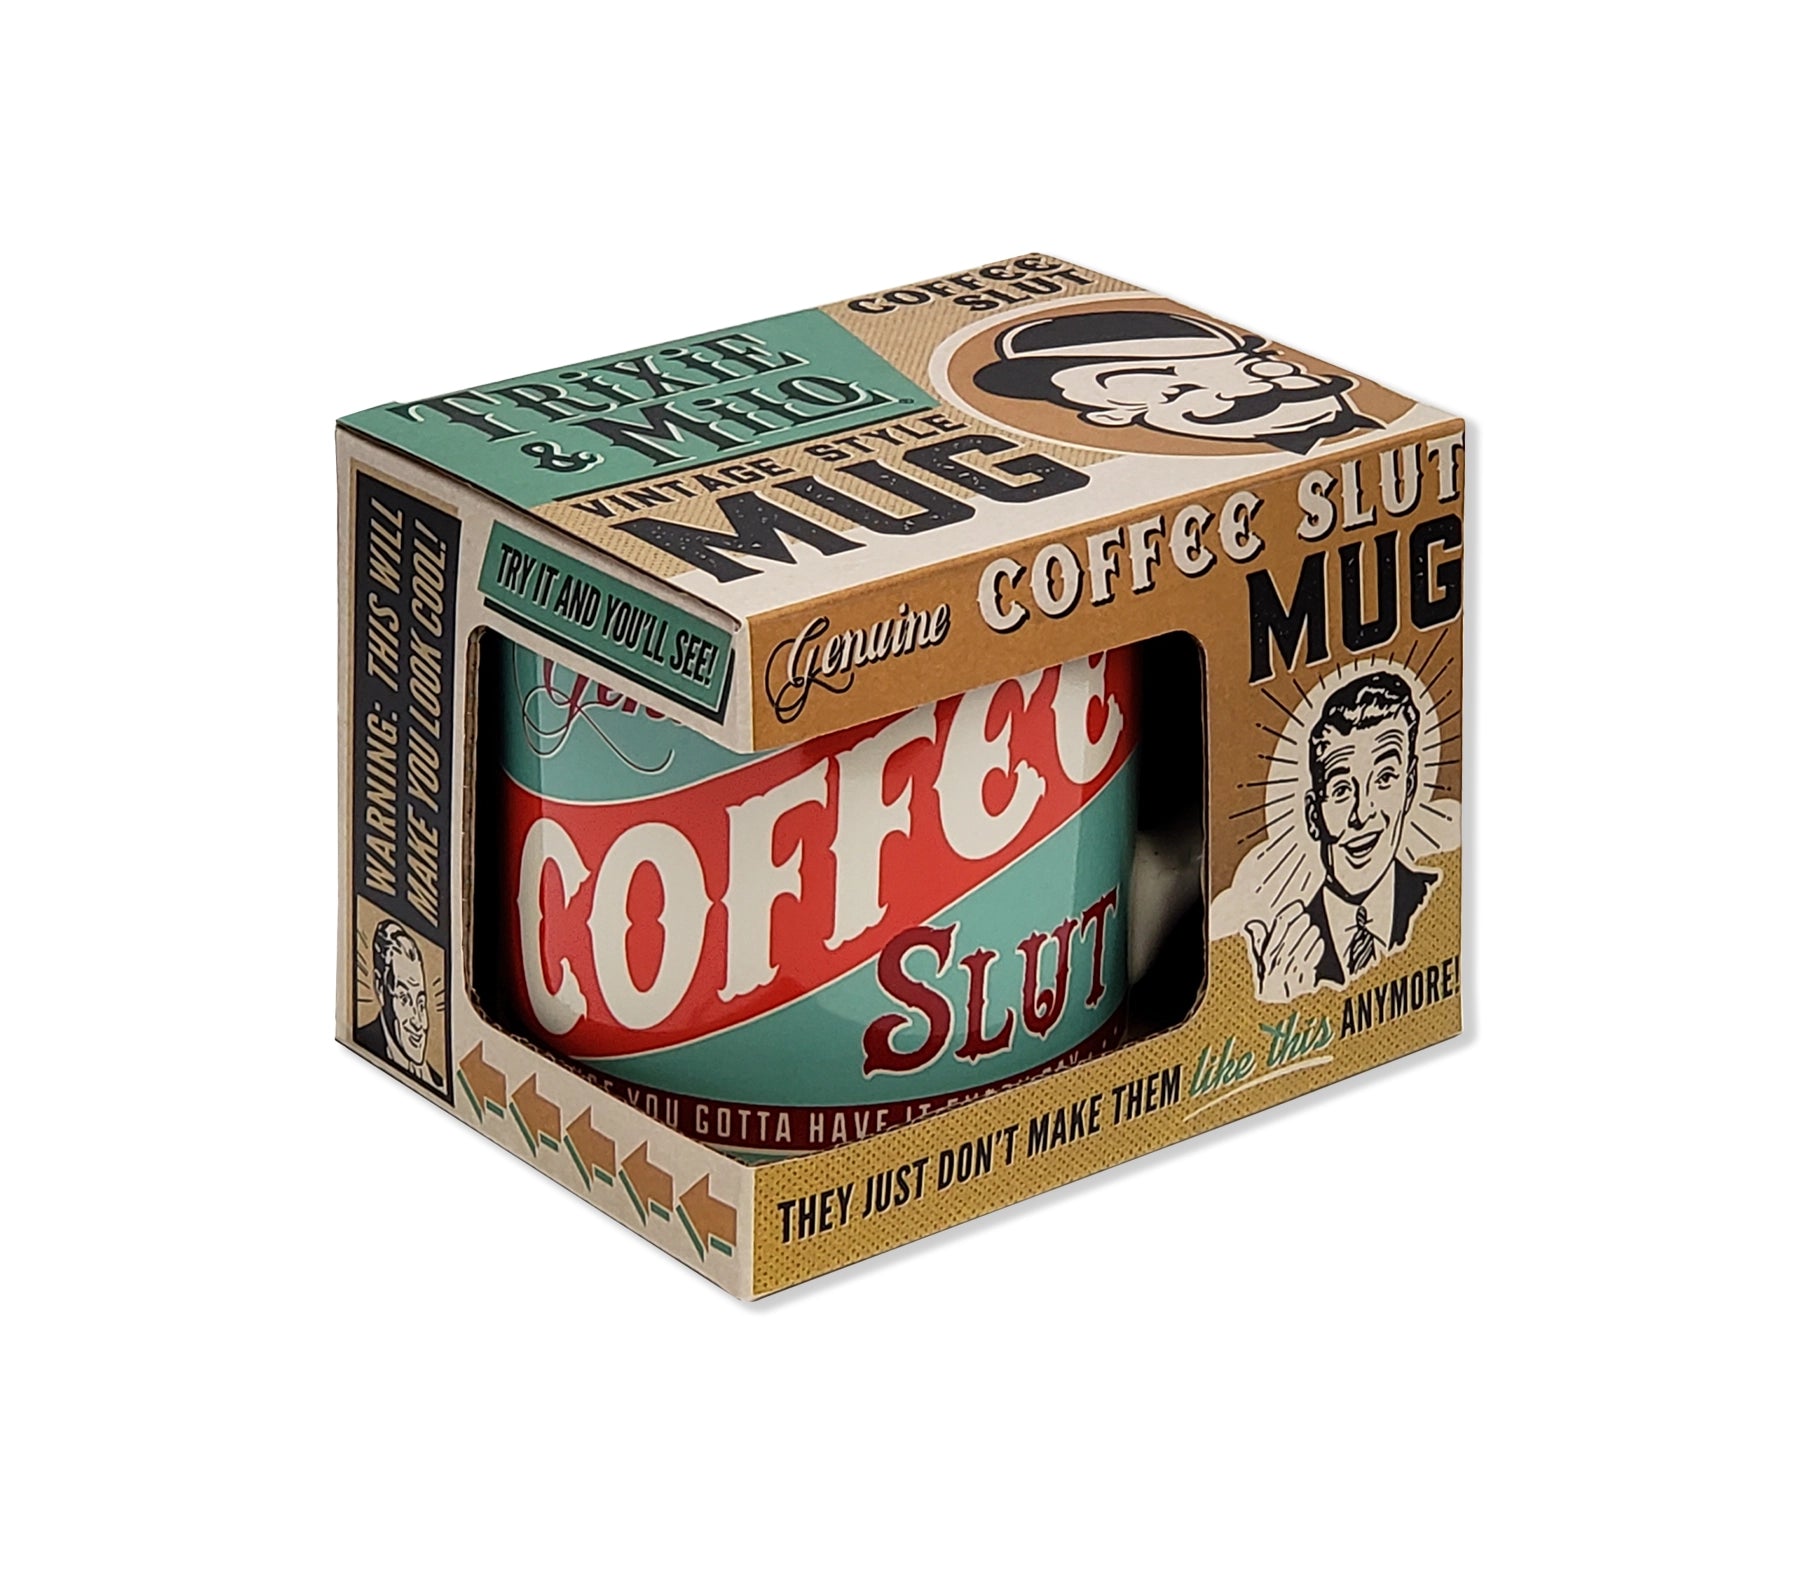 ceramic tea or coffee mug. cafe cup reads "Genuine Coffee Slut" in teal, dark red, bright red retro vintage style present in kitschy gift box displayed in kitschy gift box